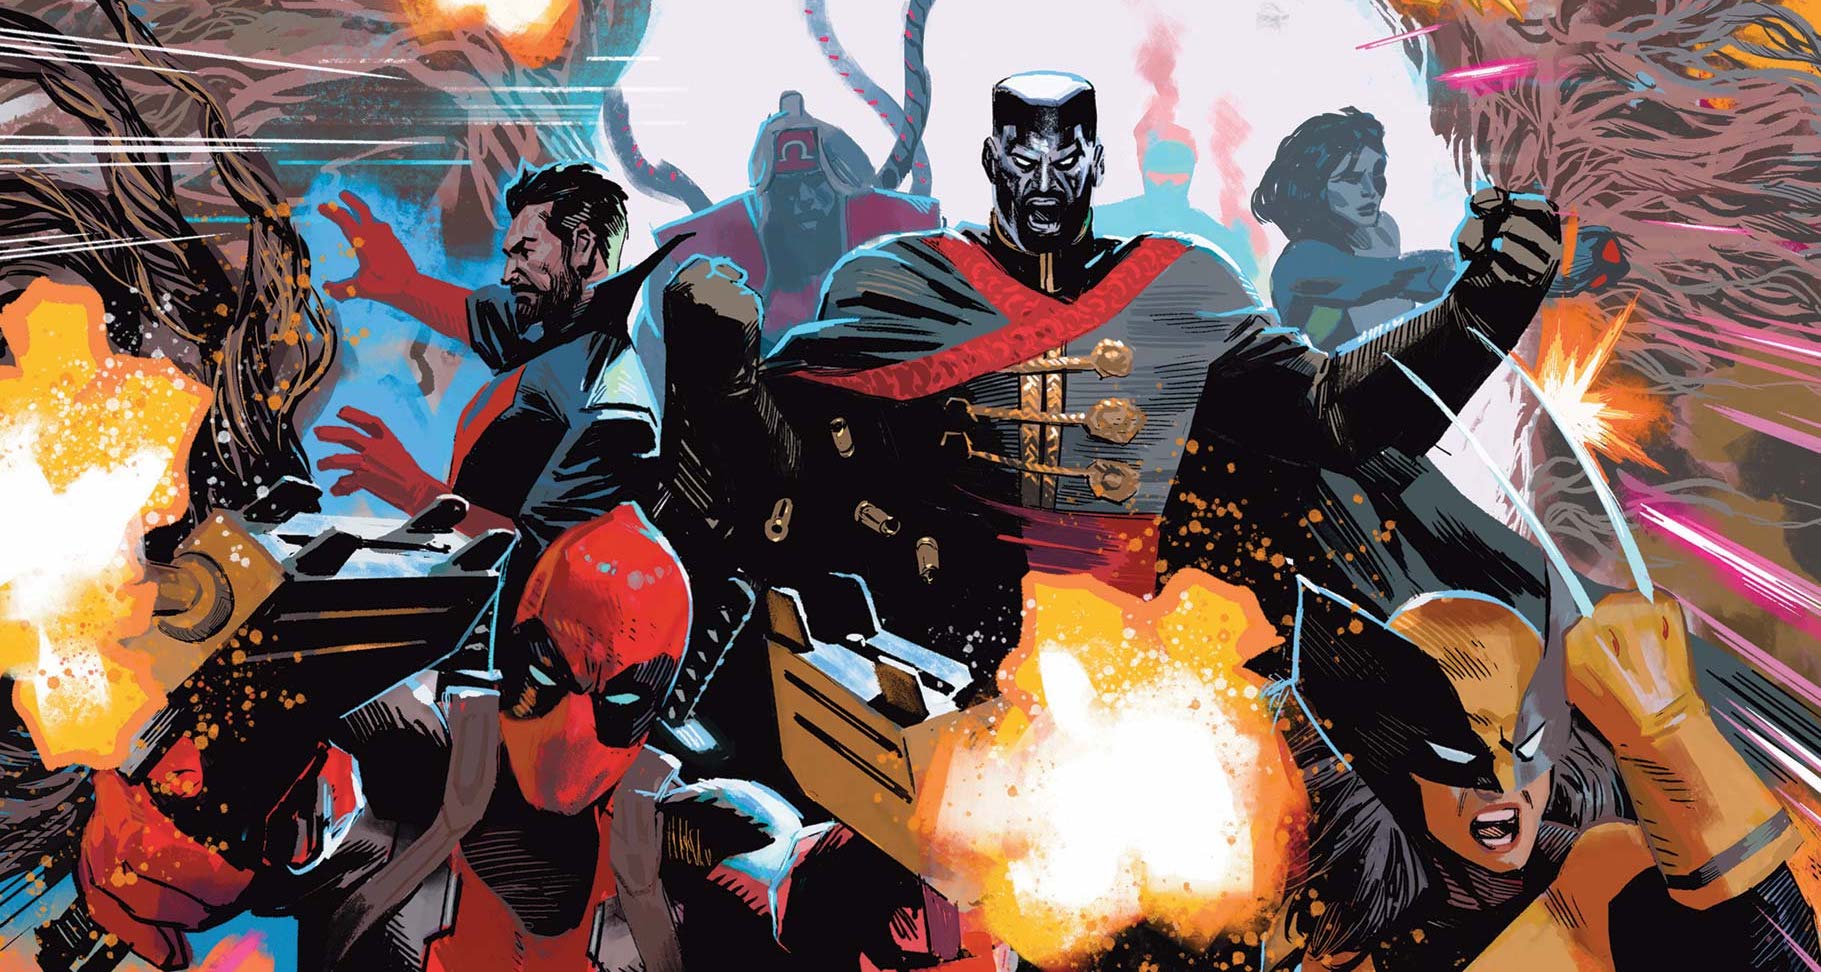 'X-Force' #43 handles the team well before and during the Hellfire Gala